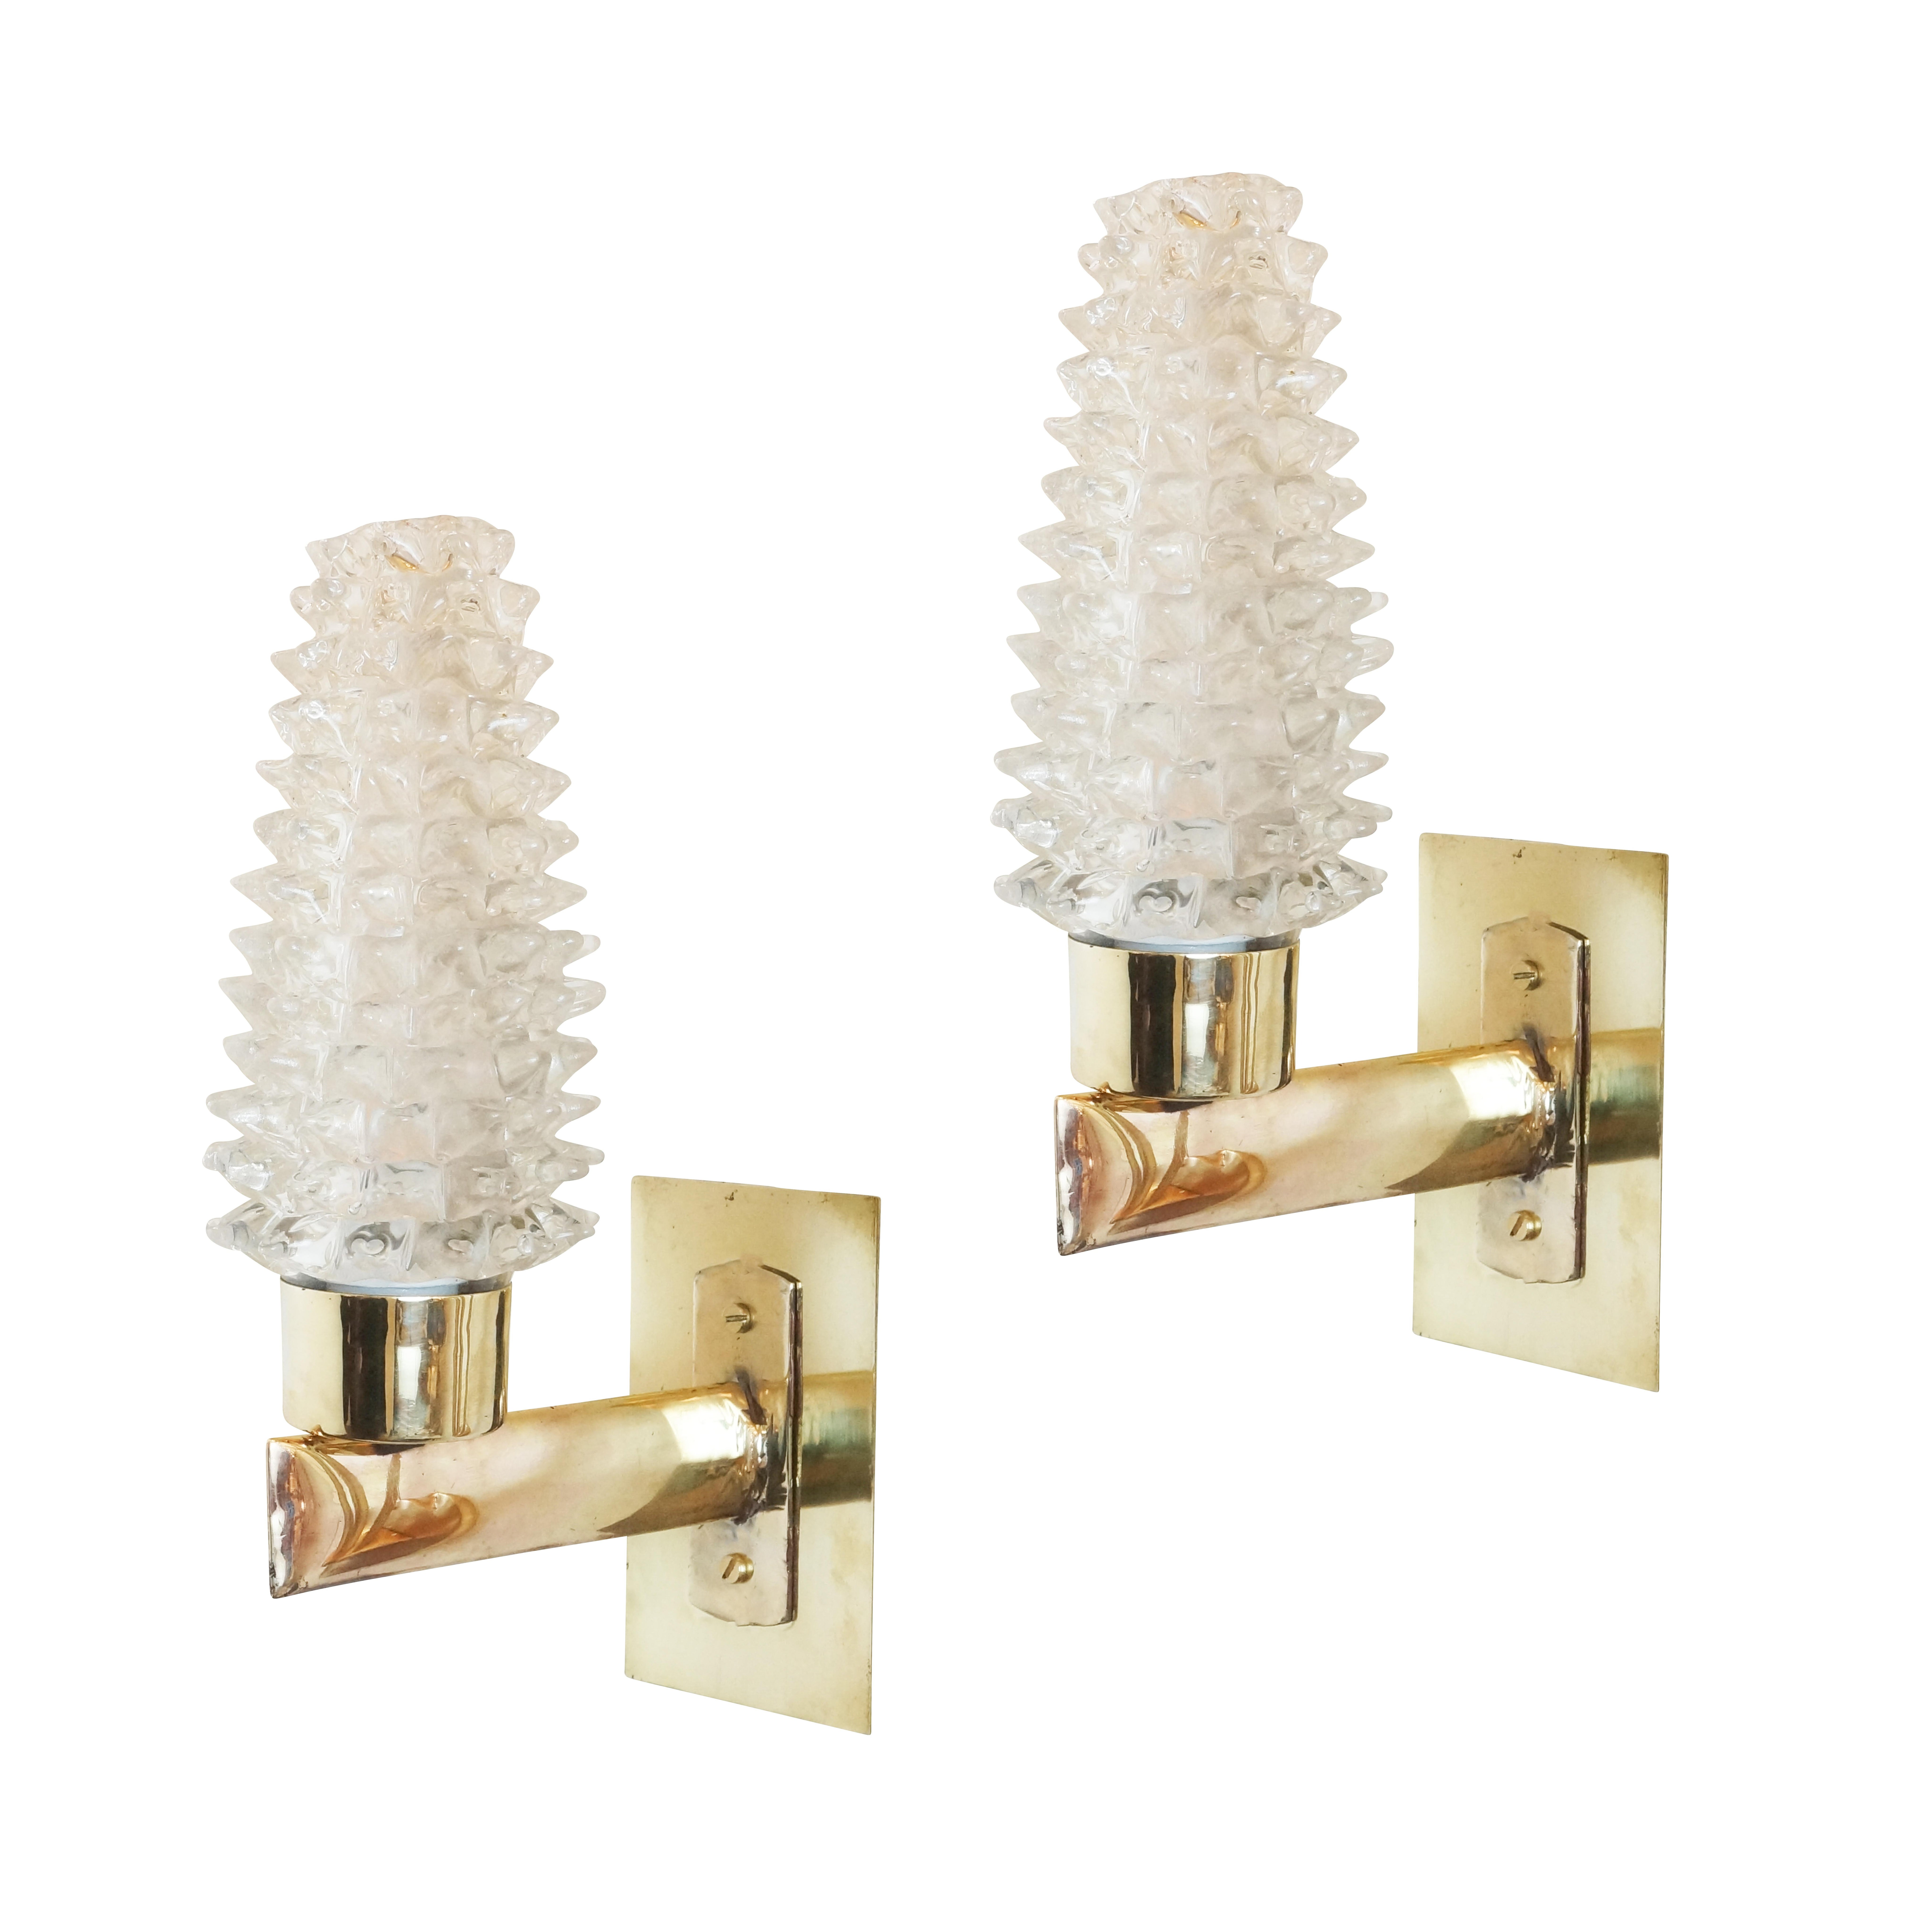 Murano Glass "Rostrato" Sconces by Barovier, Italy, 1960s For Sale